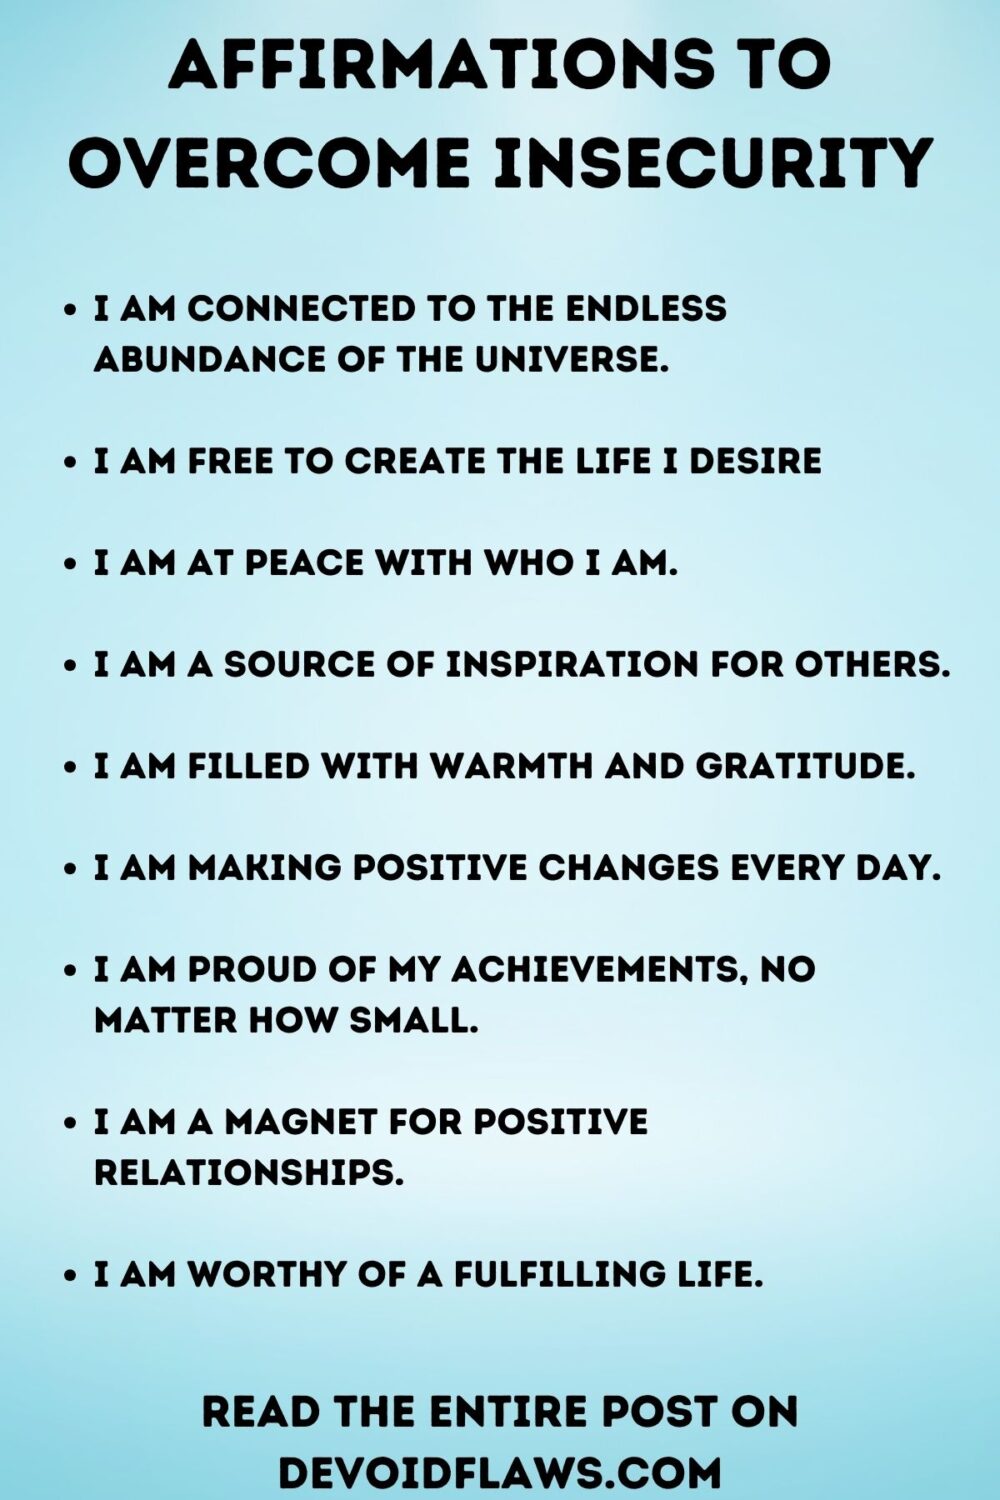 Affirmations to Overcome Insecurity